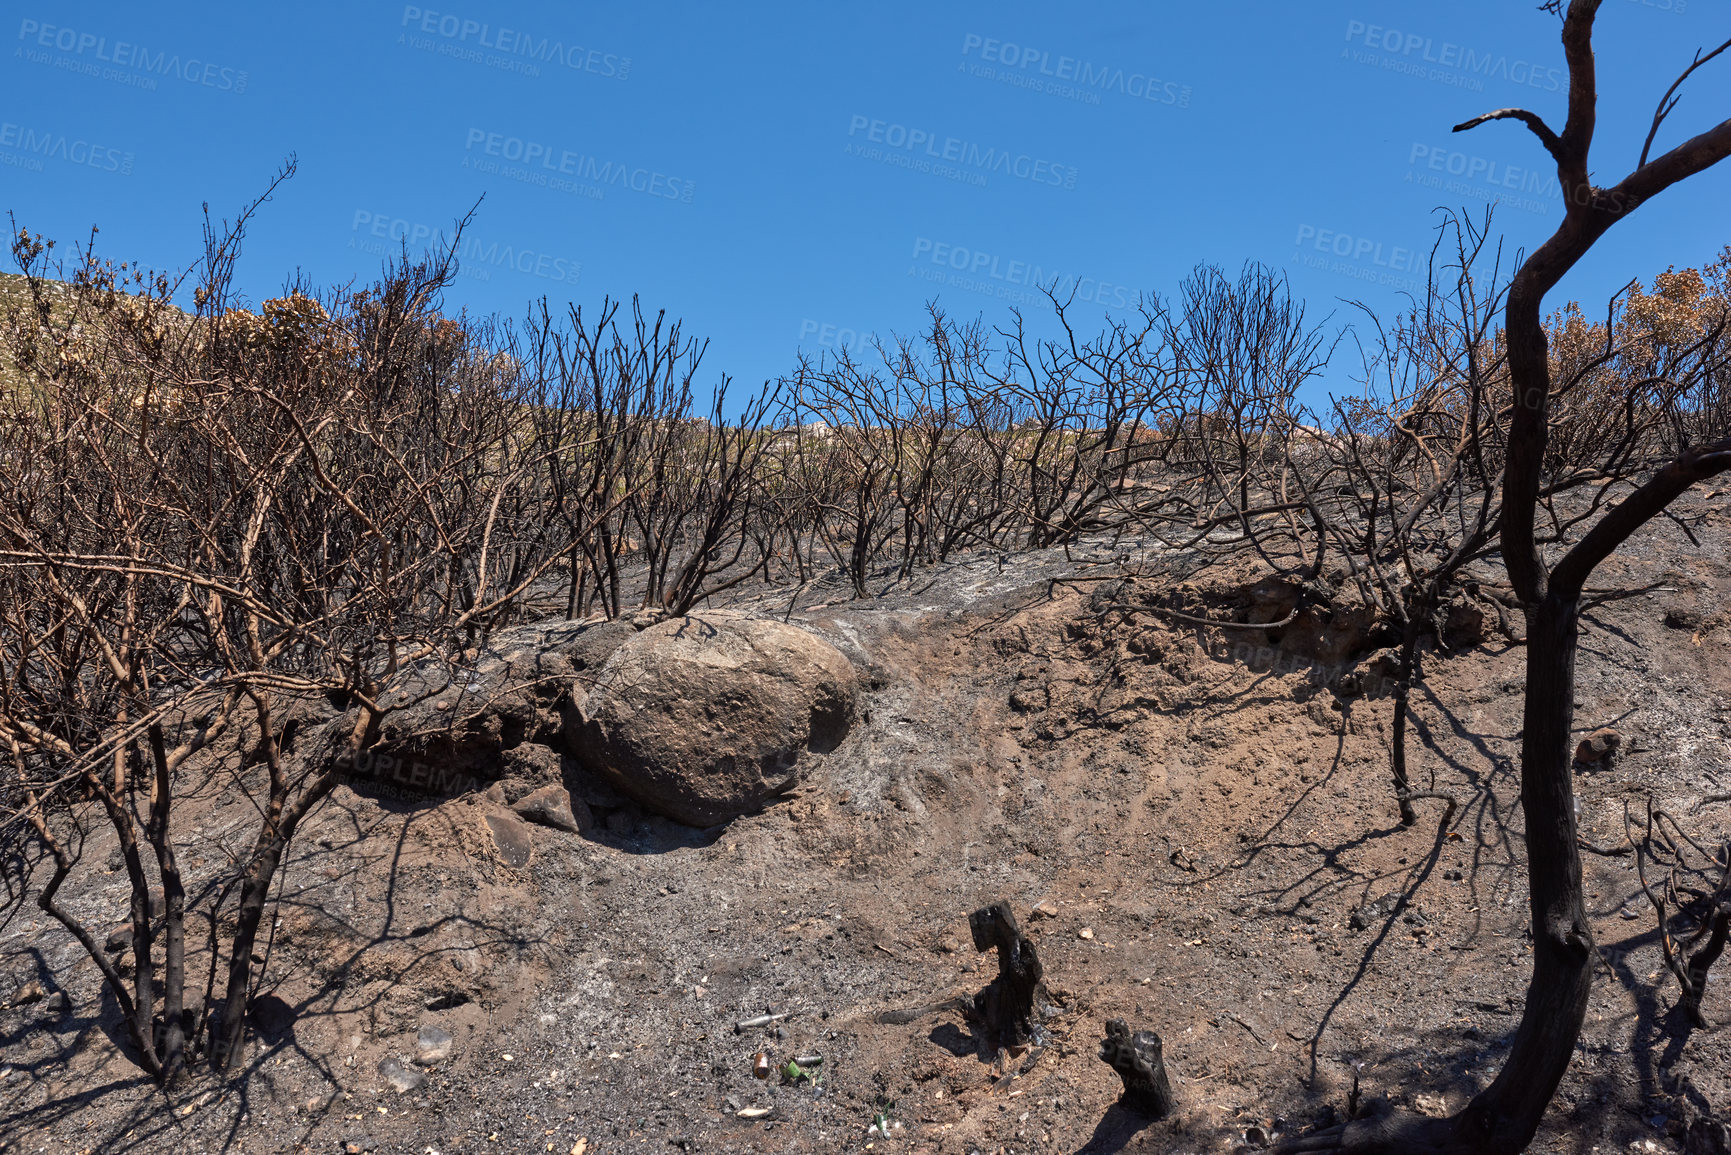 Buy stock photo Burnt forest trees from bushfire in remote woods. Destruction aftermath, deforestation from uncontrollable nature wildfire in woodland. Dry plants, arid, barren wildlife. Human error, global warming